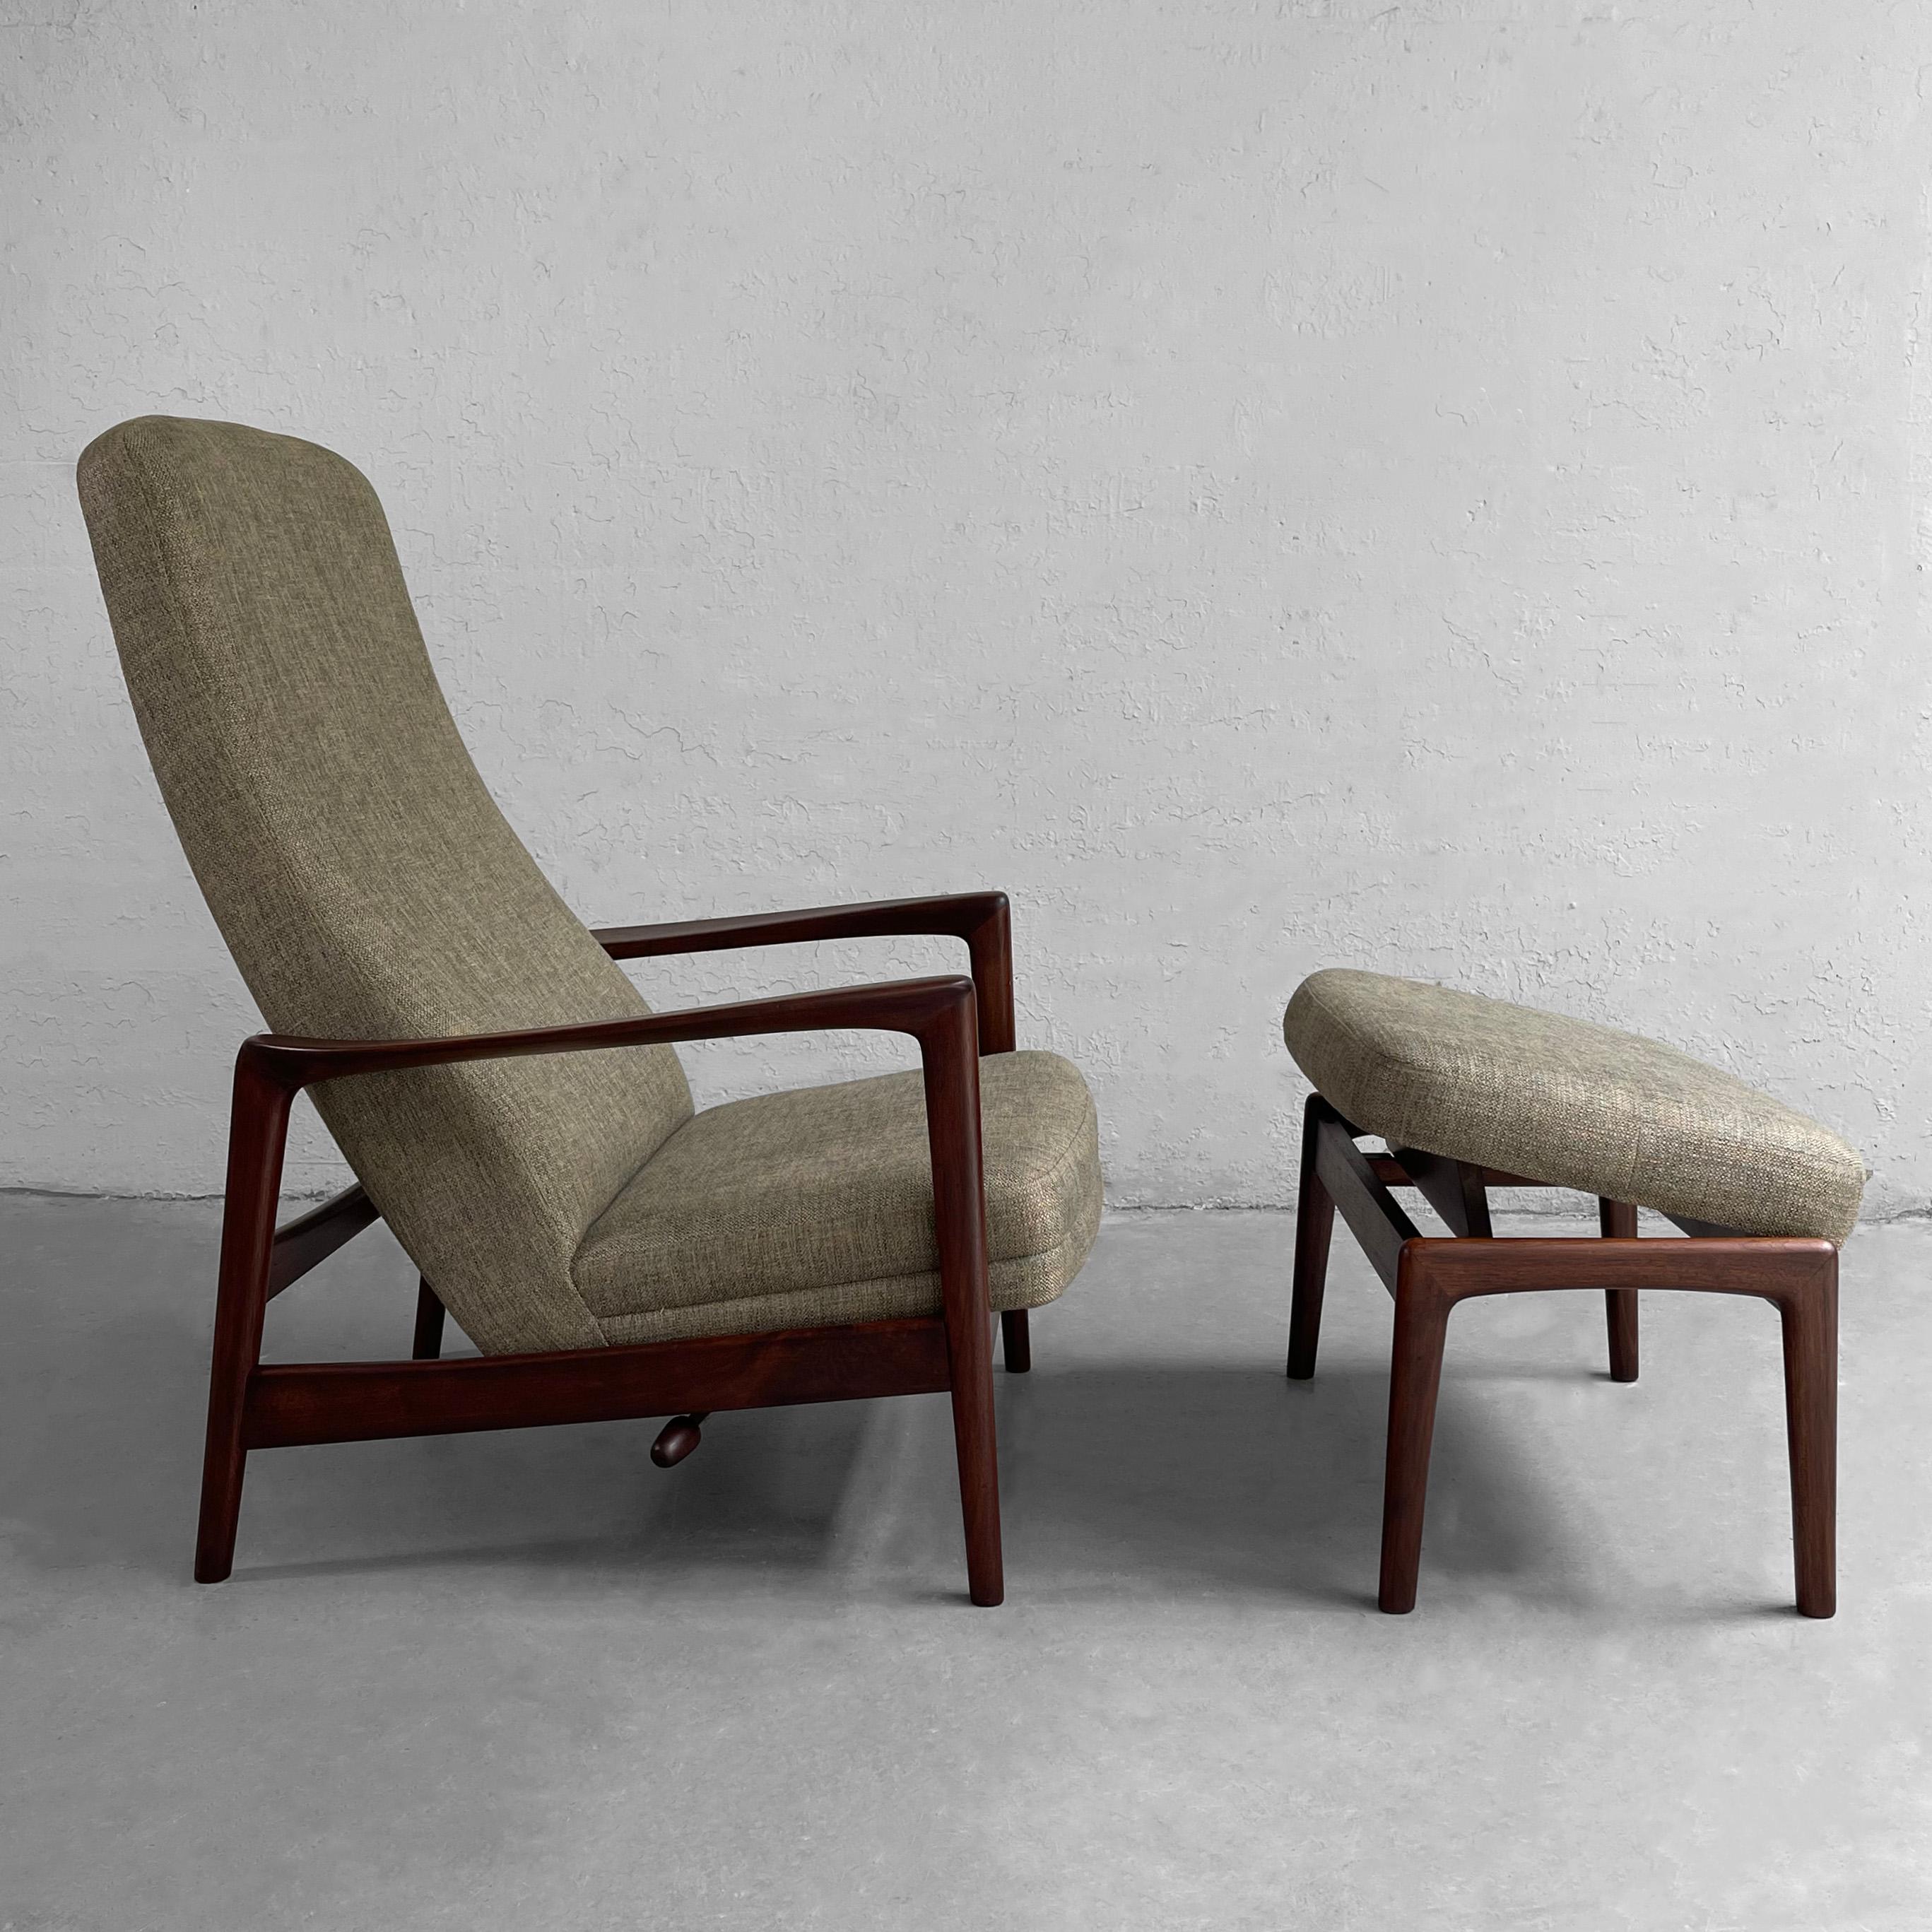 Swedish Recliner Lounge Chair with Ottoman by Folke Ohlsson for DUX